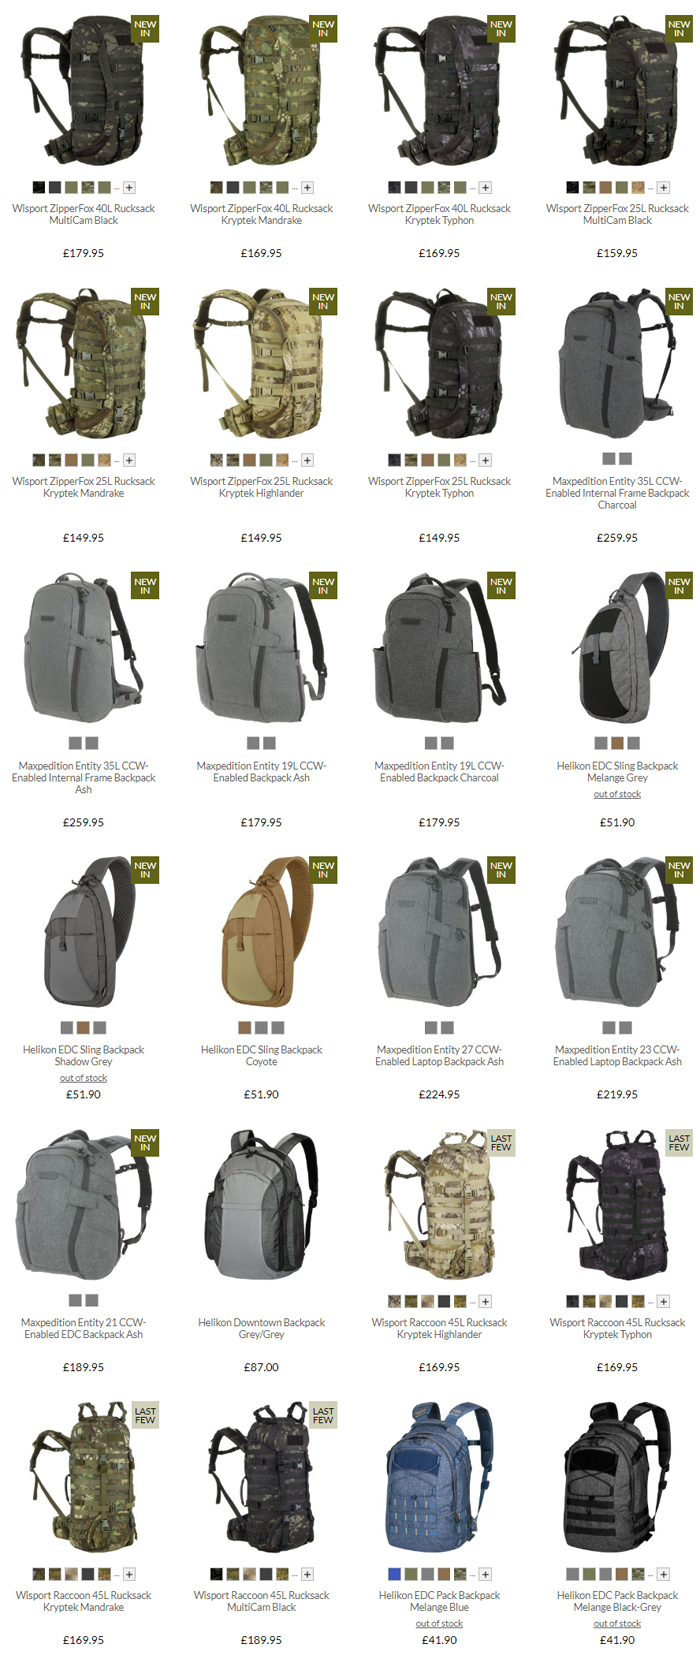 Military 1st Backpack Sale 2019 02